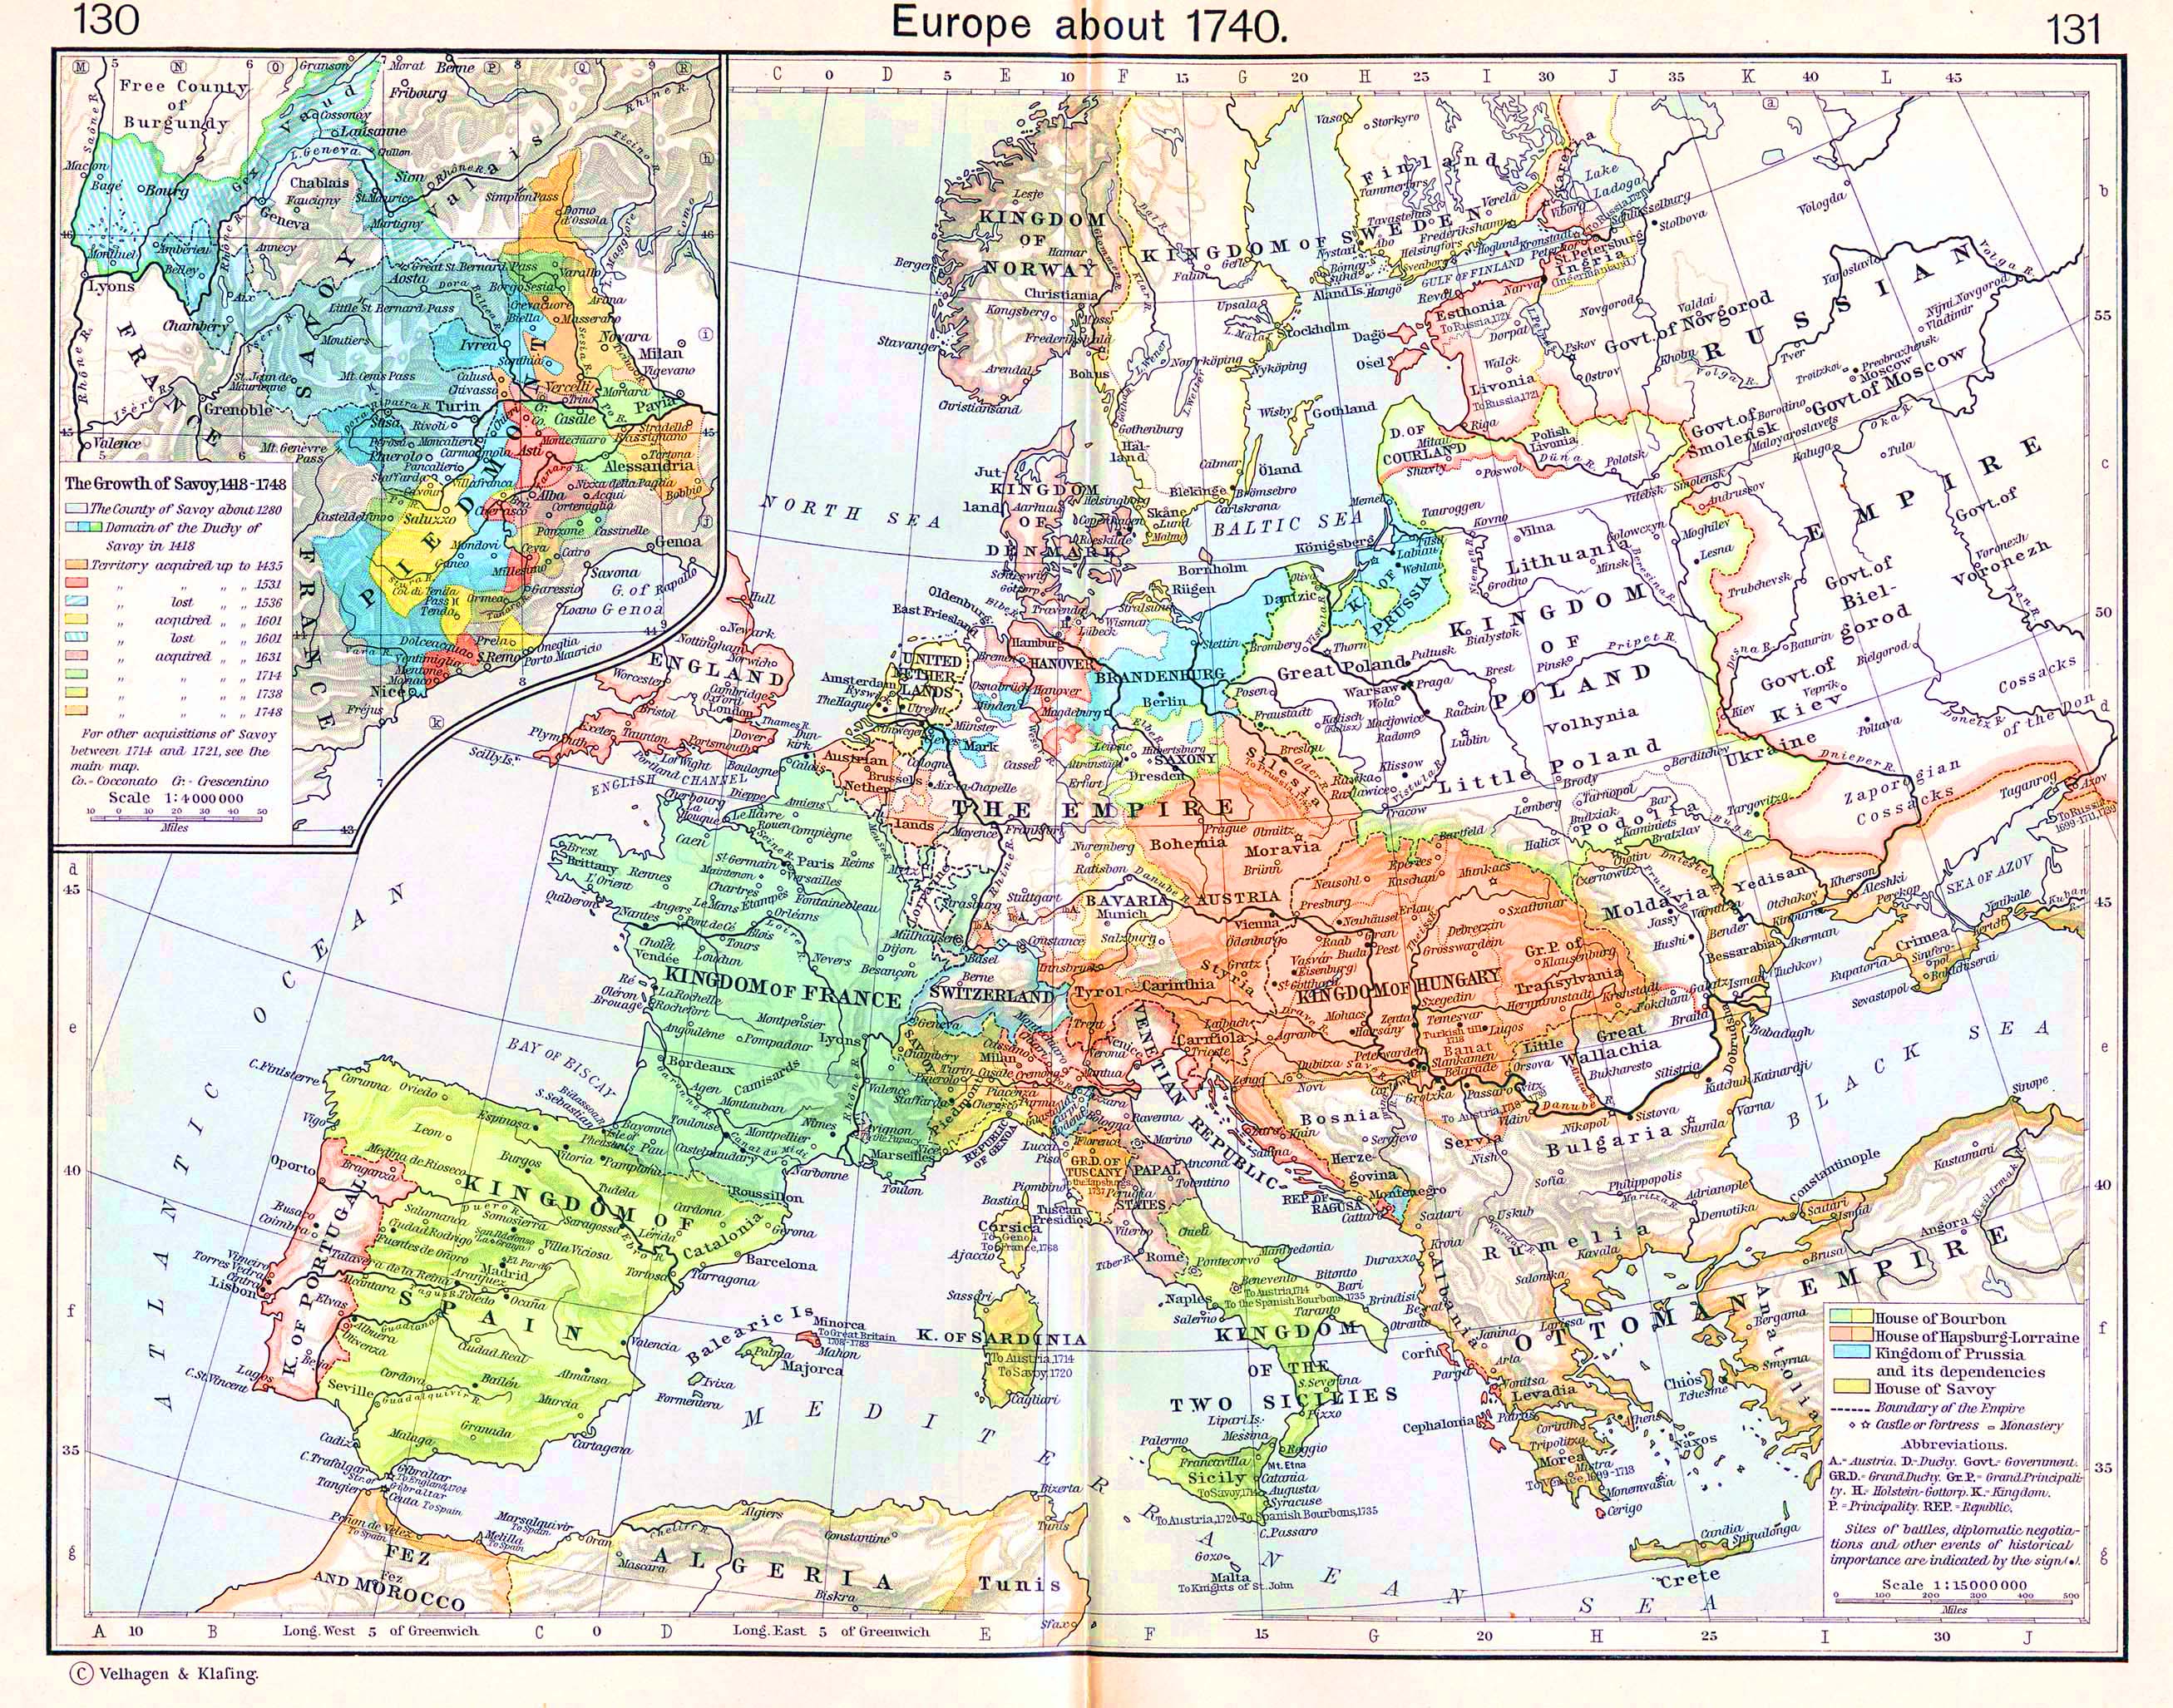 Map of Europe about 1740